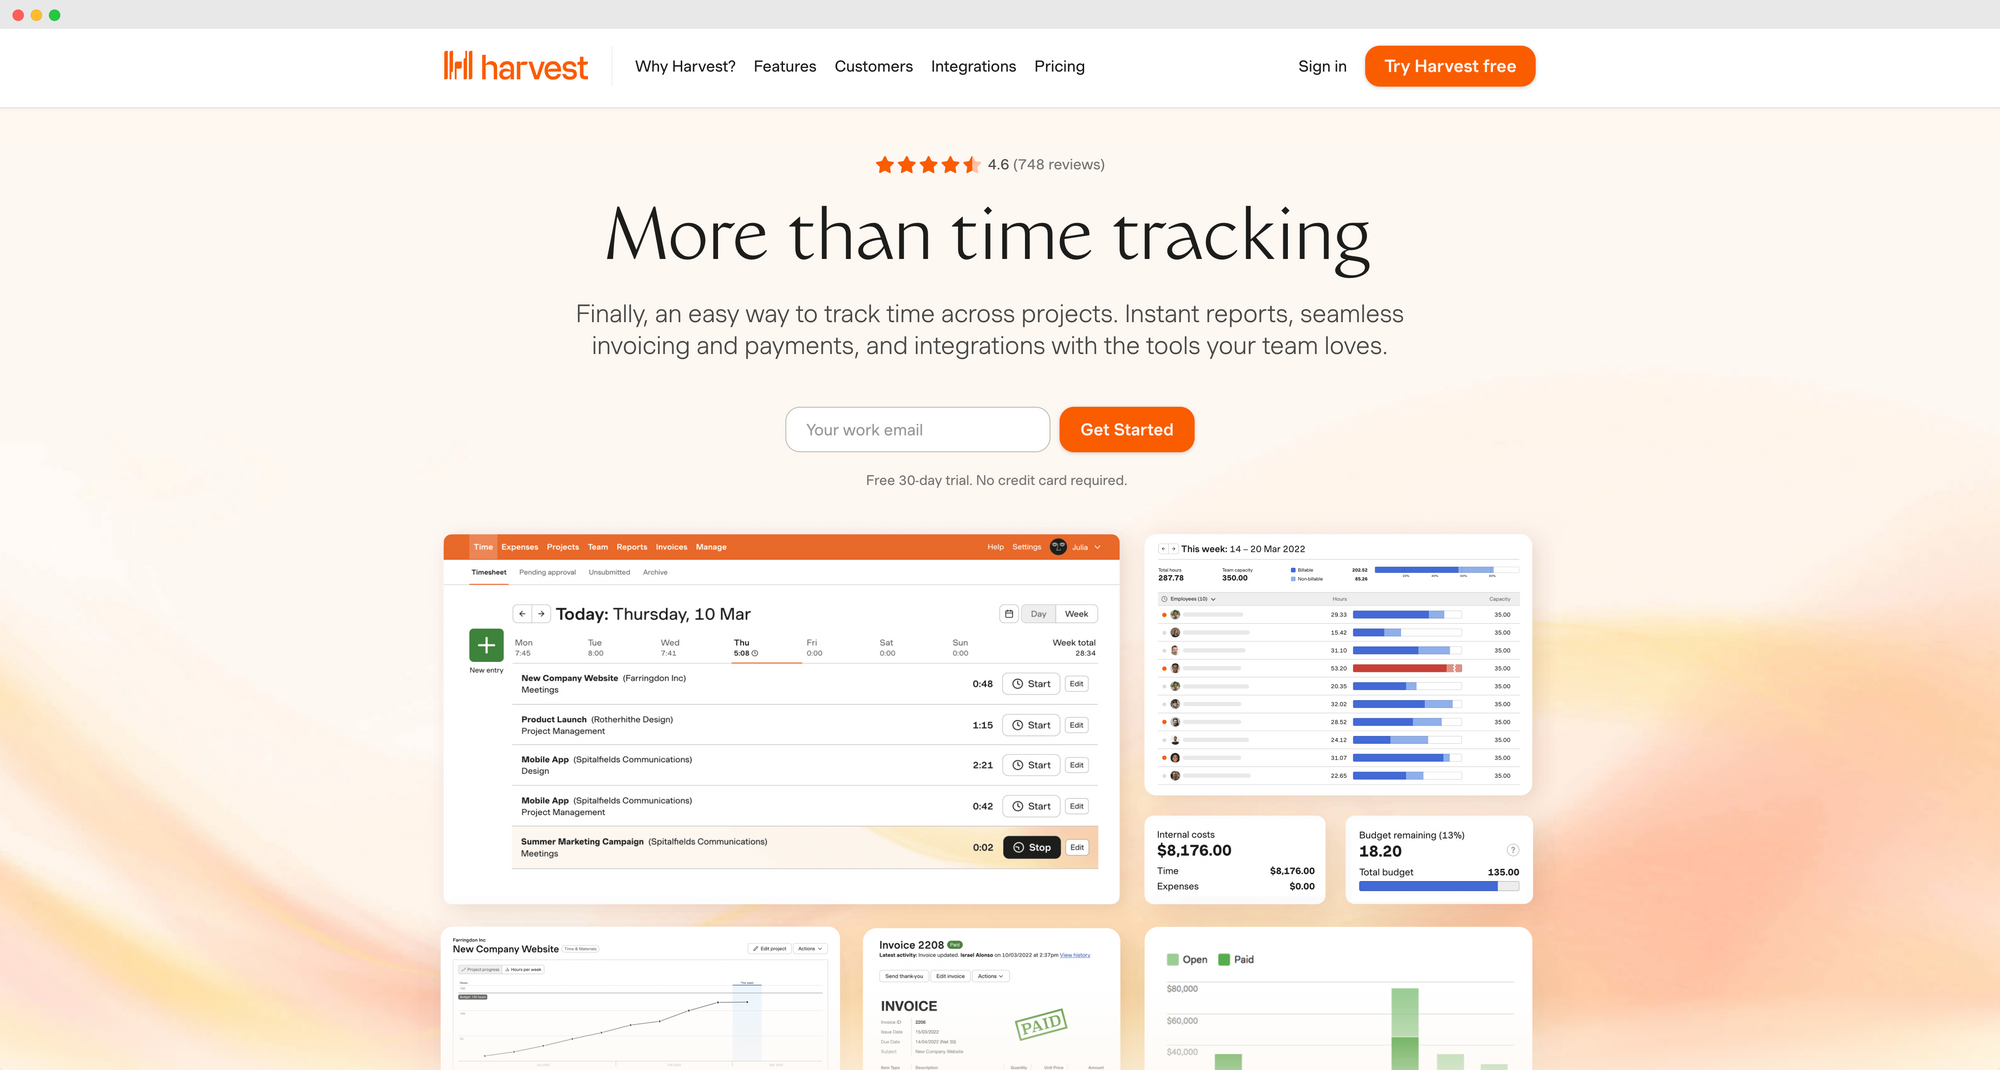 Harvest software interface showing time tracking, reporting, and invoicing features